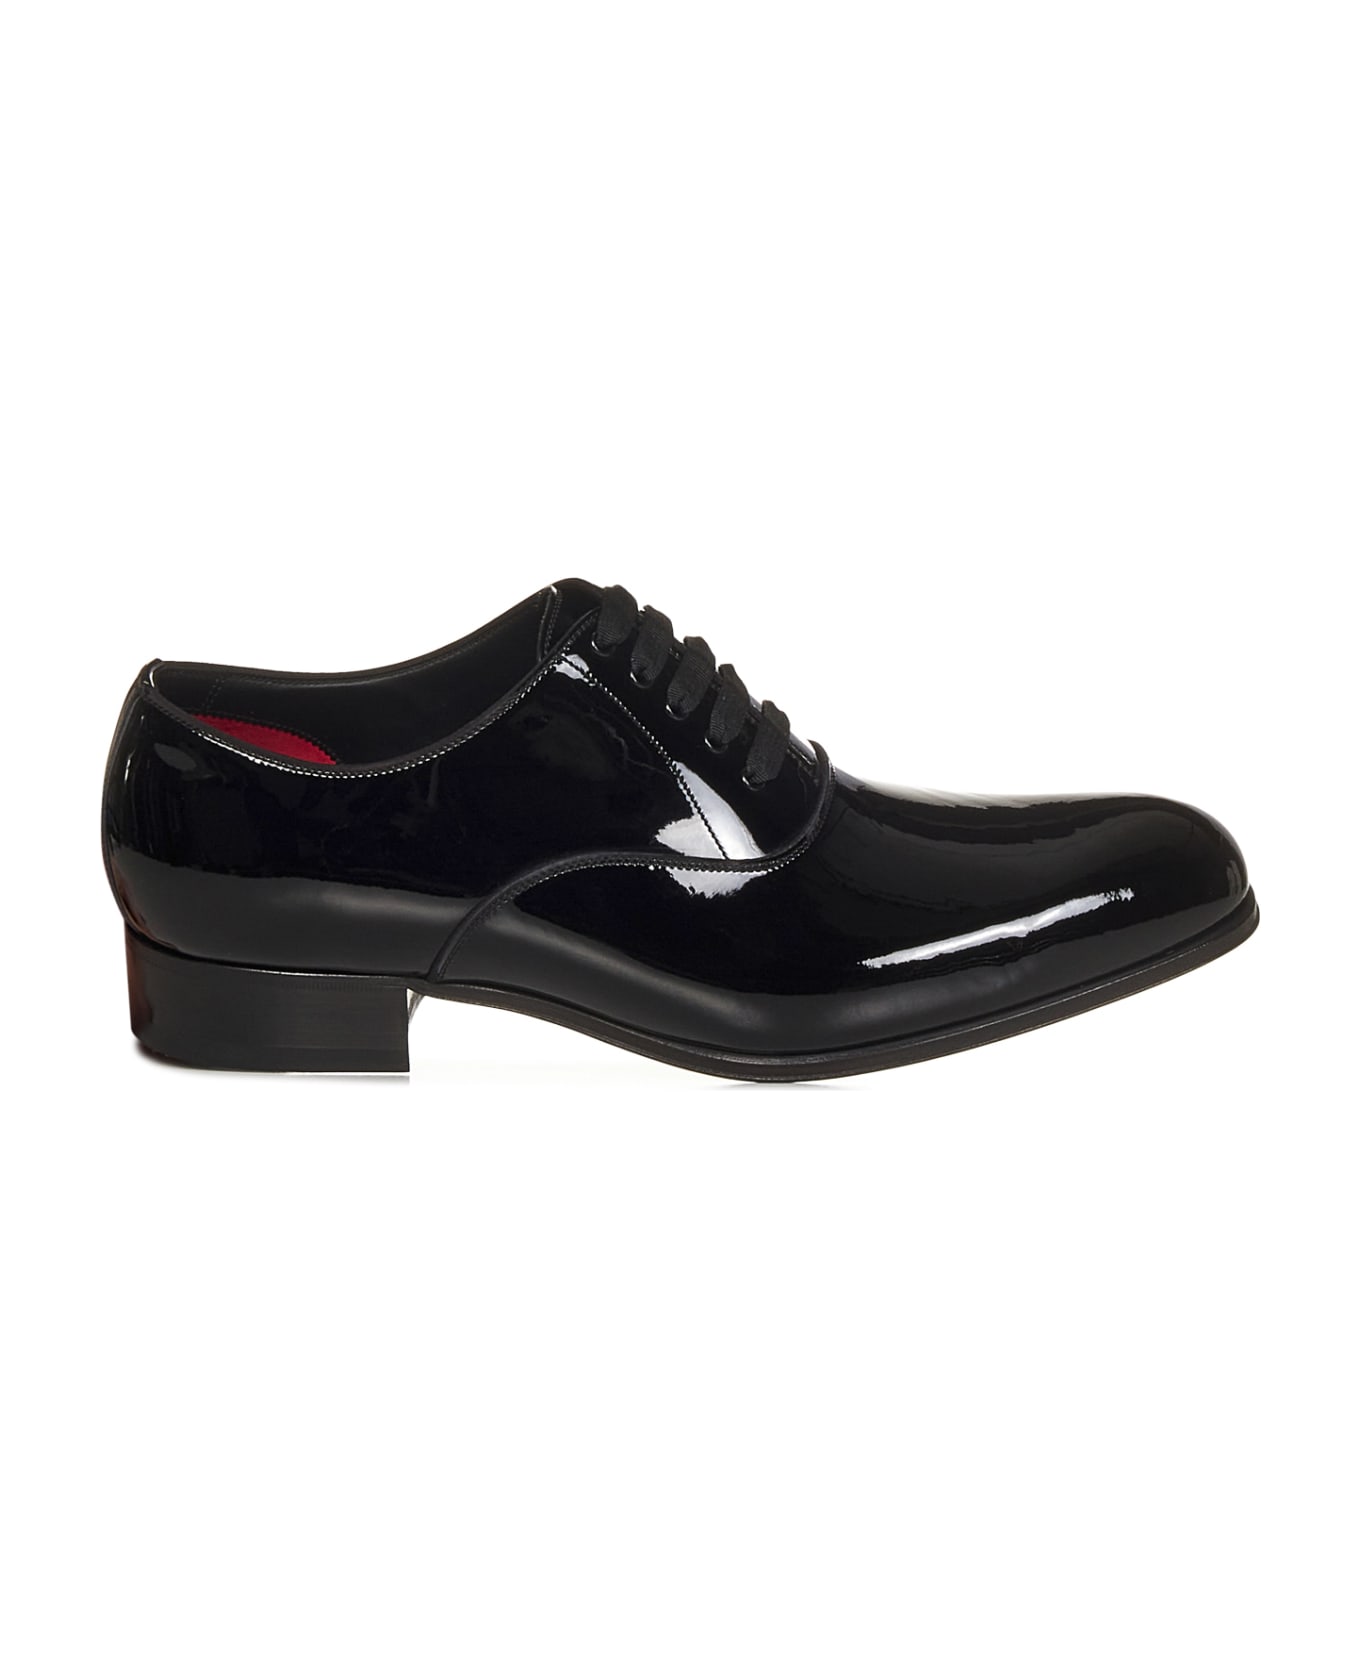 Tom Ford 'gianni' Laced Up - Black